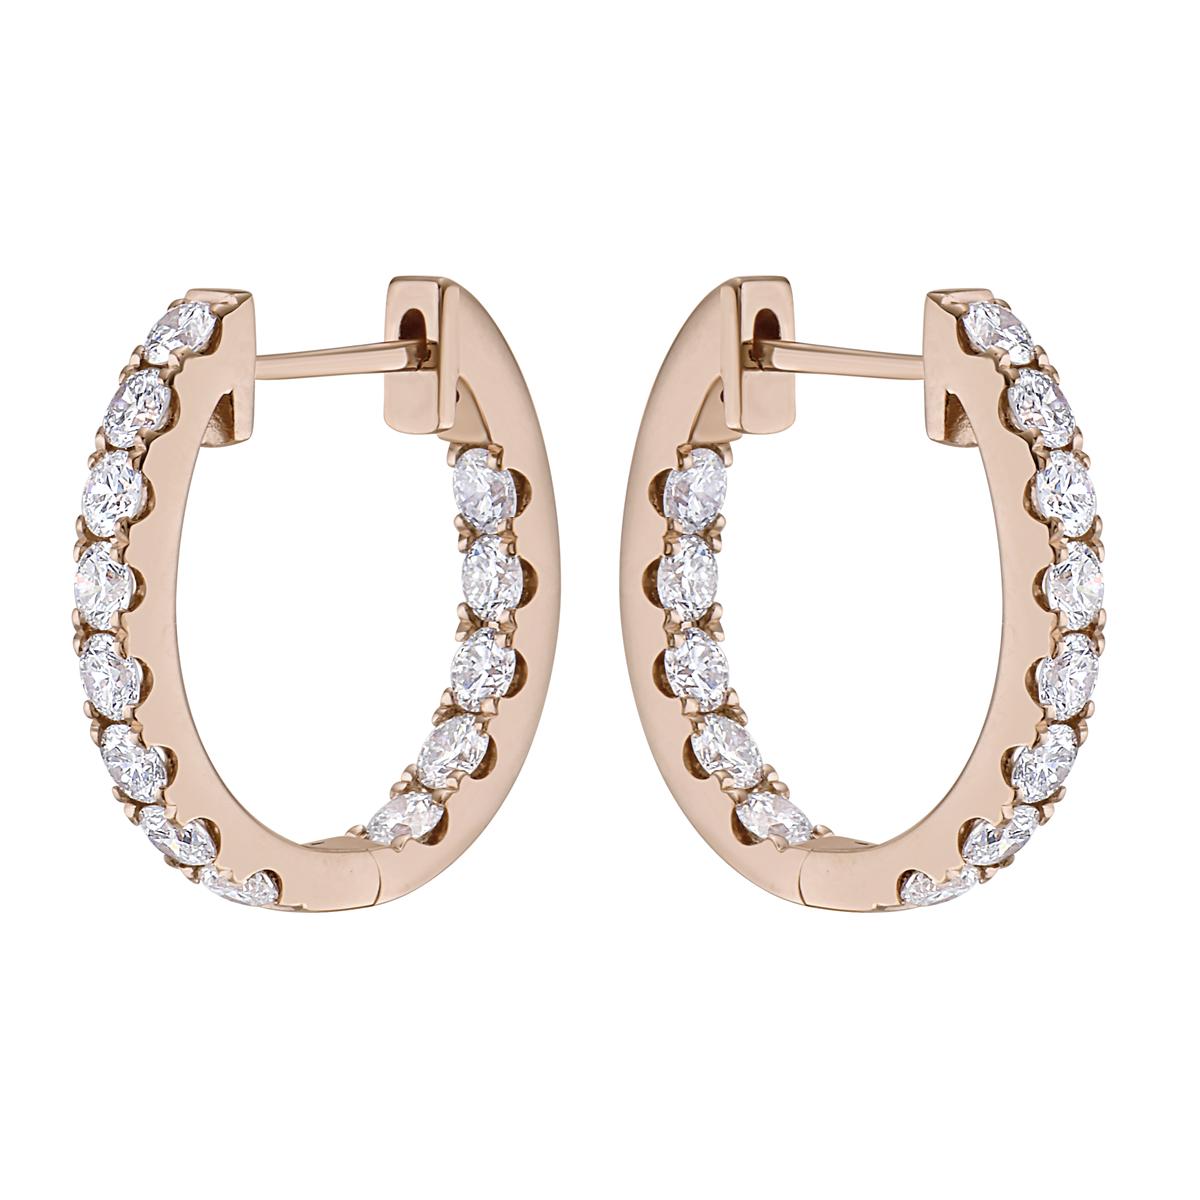 With these exquisite rose gold huggies hoop diamond earrings, style and glamour are in the spotlight. These rose gold hoop earrings are set in 14-karat gold and made from 3.8 grams of gold. The color of the diamonds is GH. The clarity is SI1. These